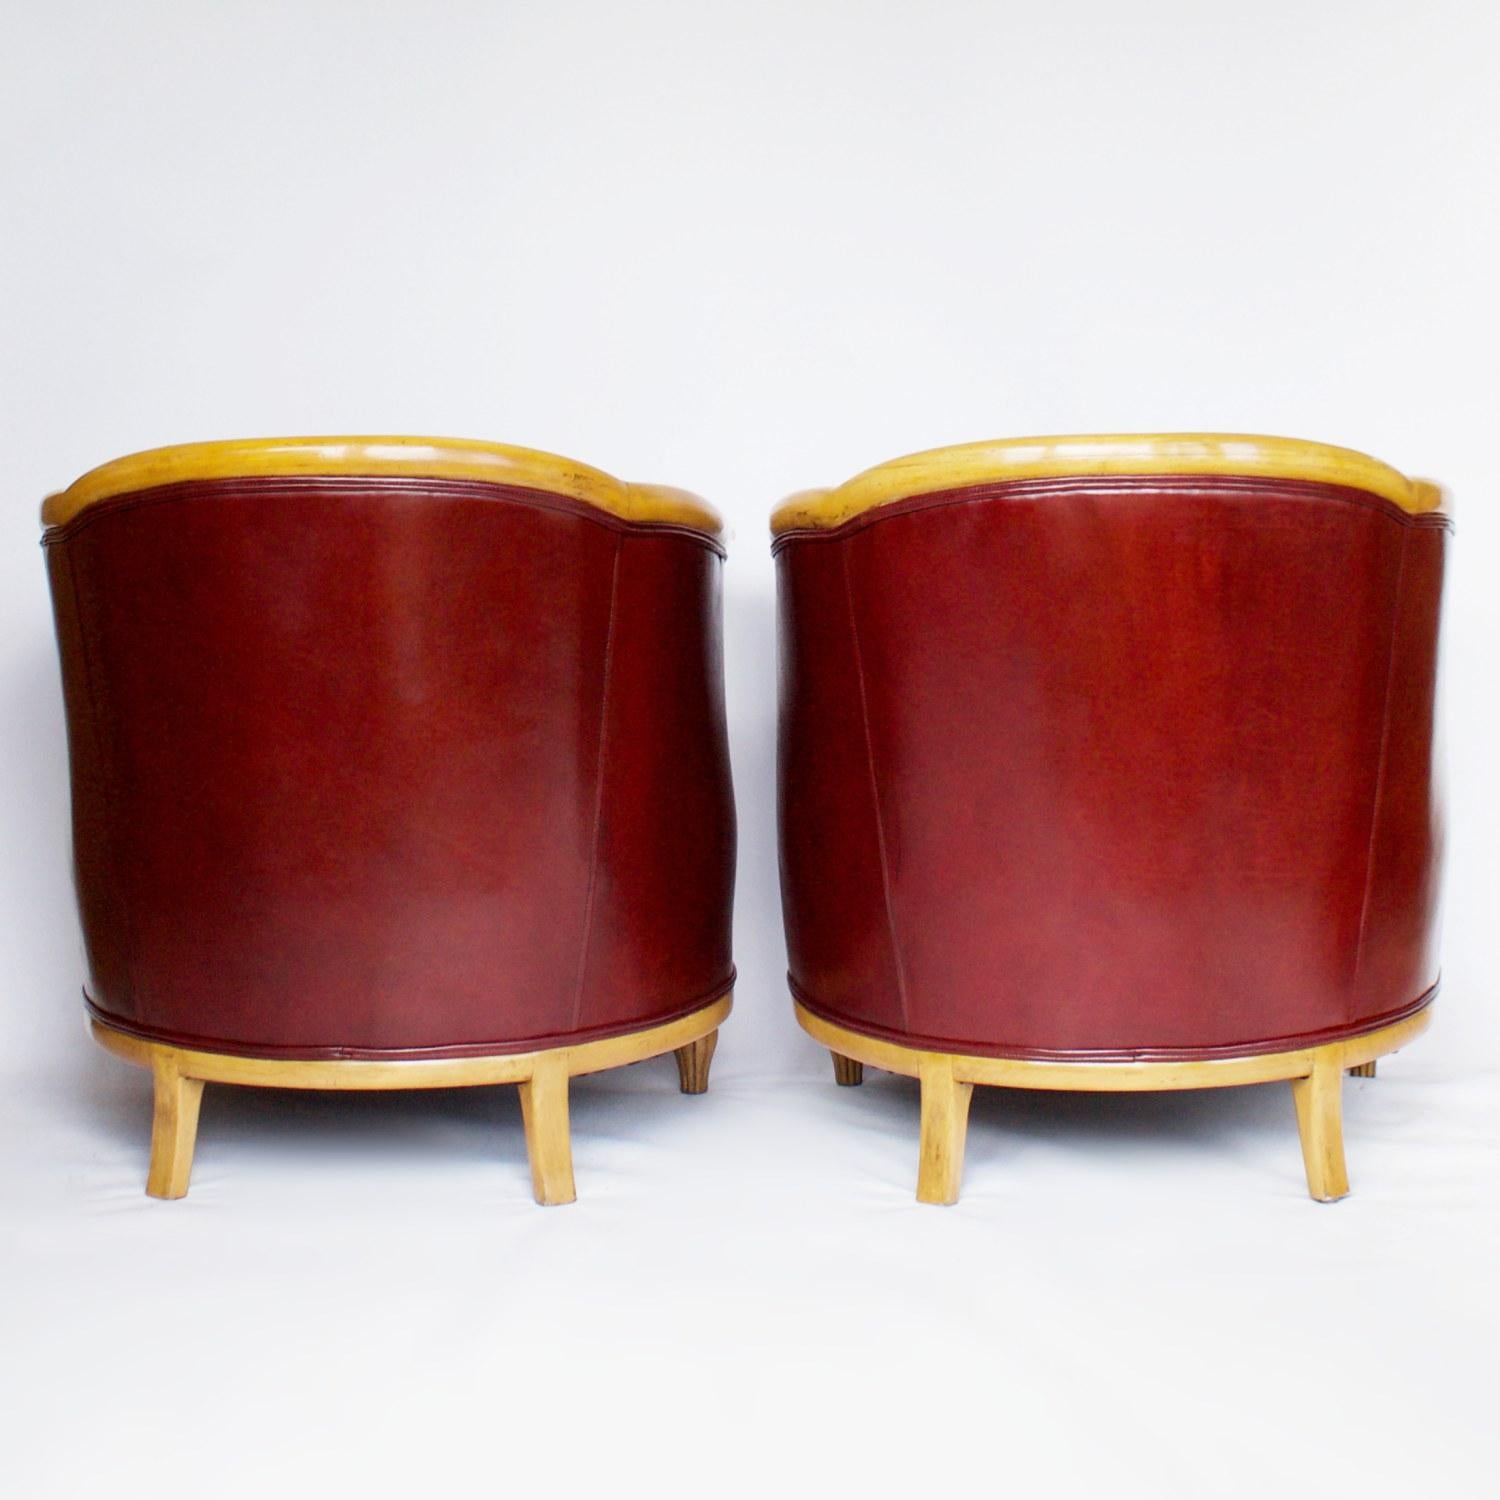 English Art Deco Pair of Tub Chairs Upholstered in Red Leather, circa 1930